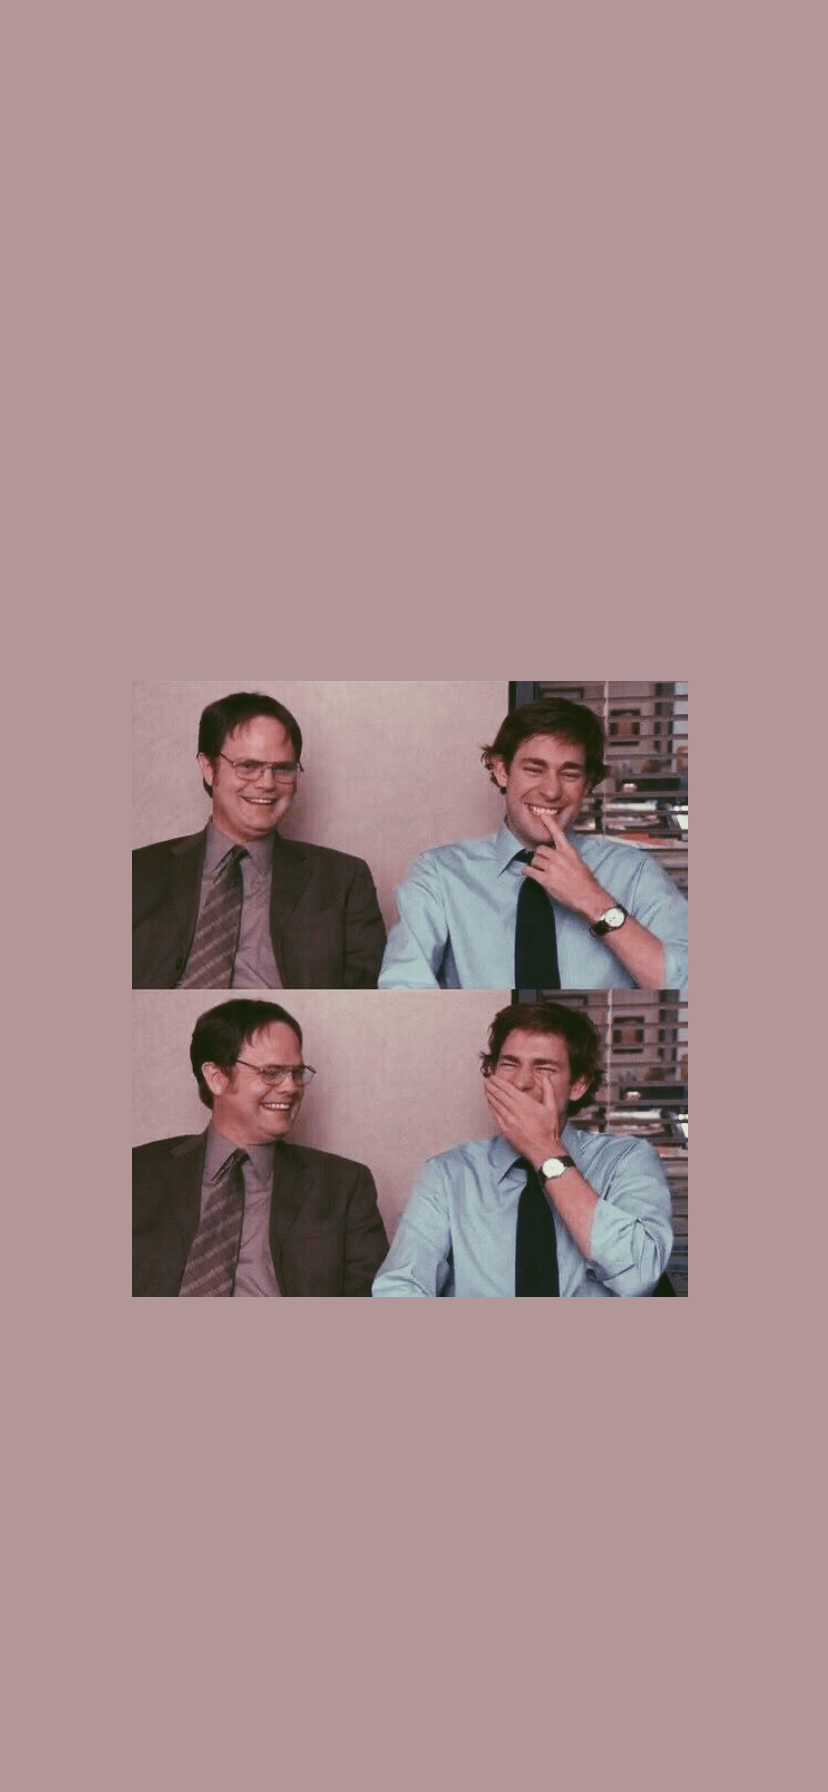 The office wallpaper aesthetic. The office characters, The office show, Office wallpaper